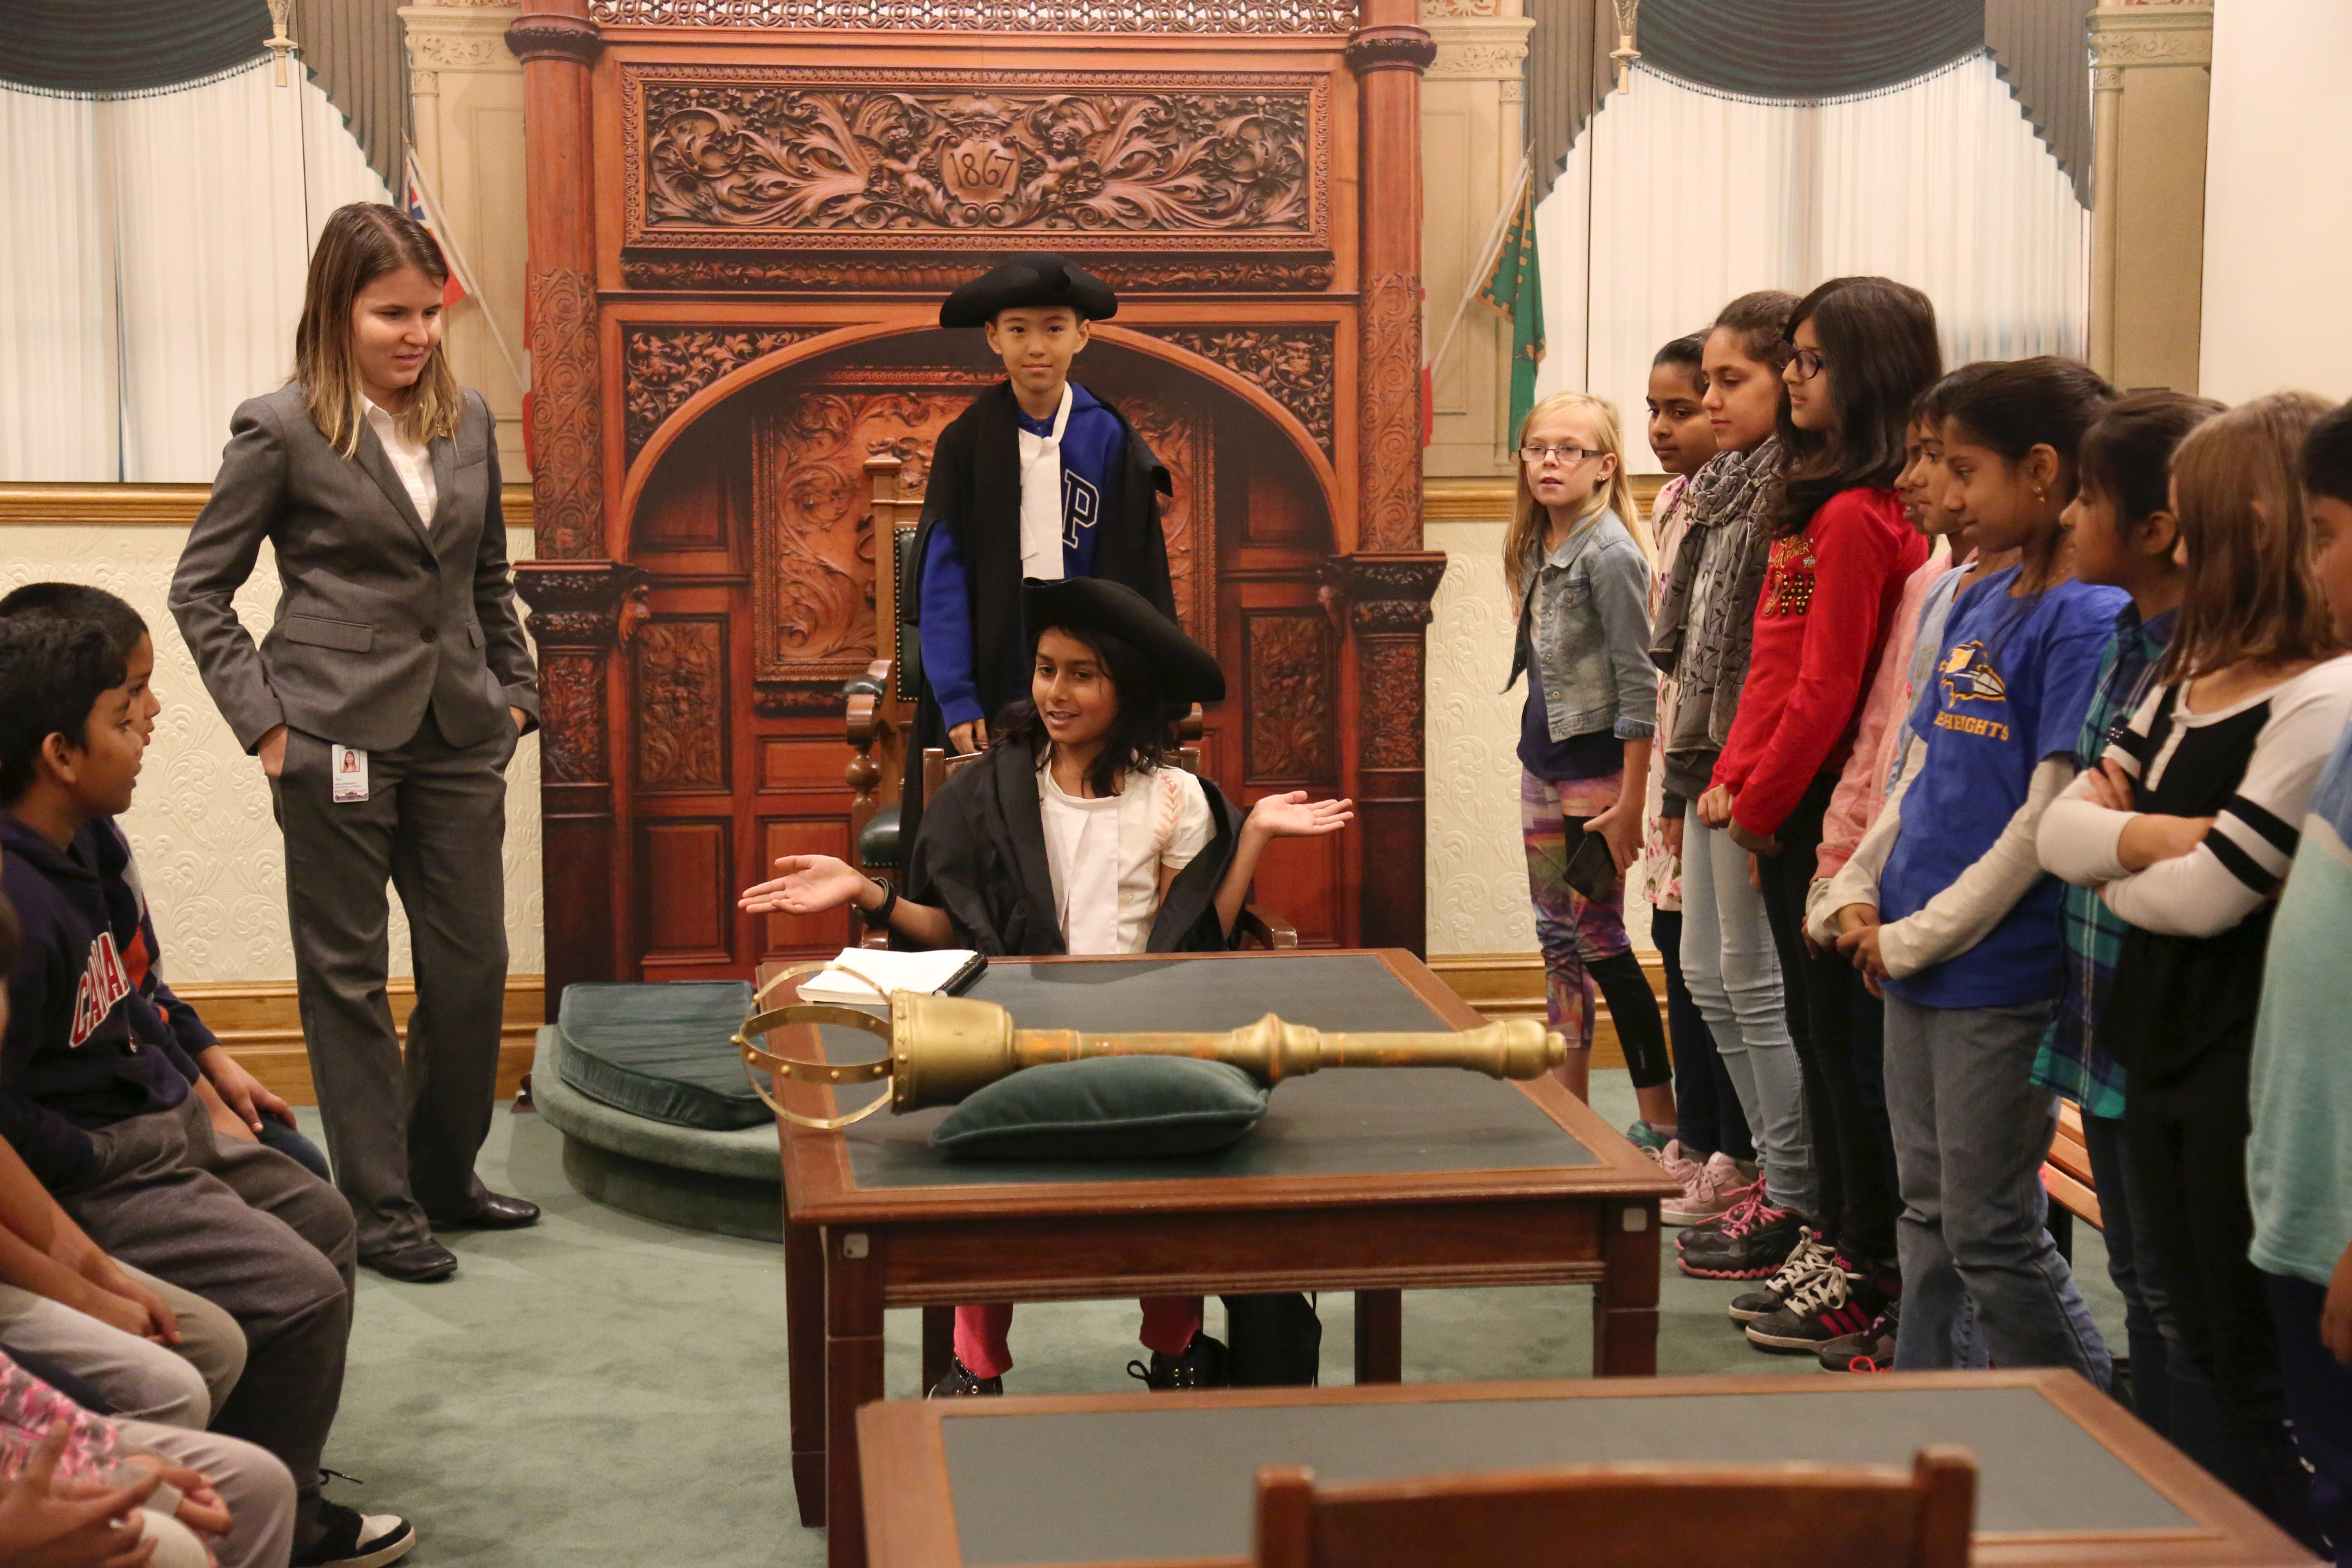 Group of young students surrounding a table with the Mace on top. Two students are in Parliamentary uniform acting as the Speaker and the Clerk.